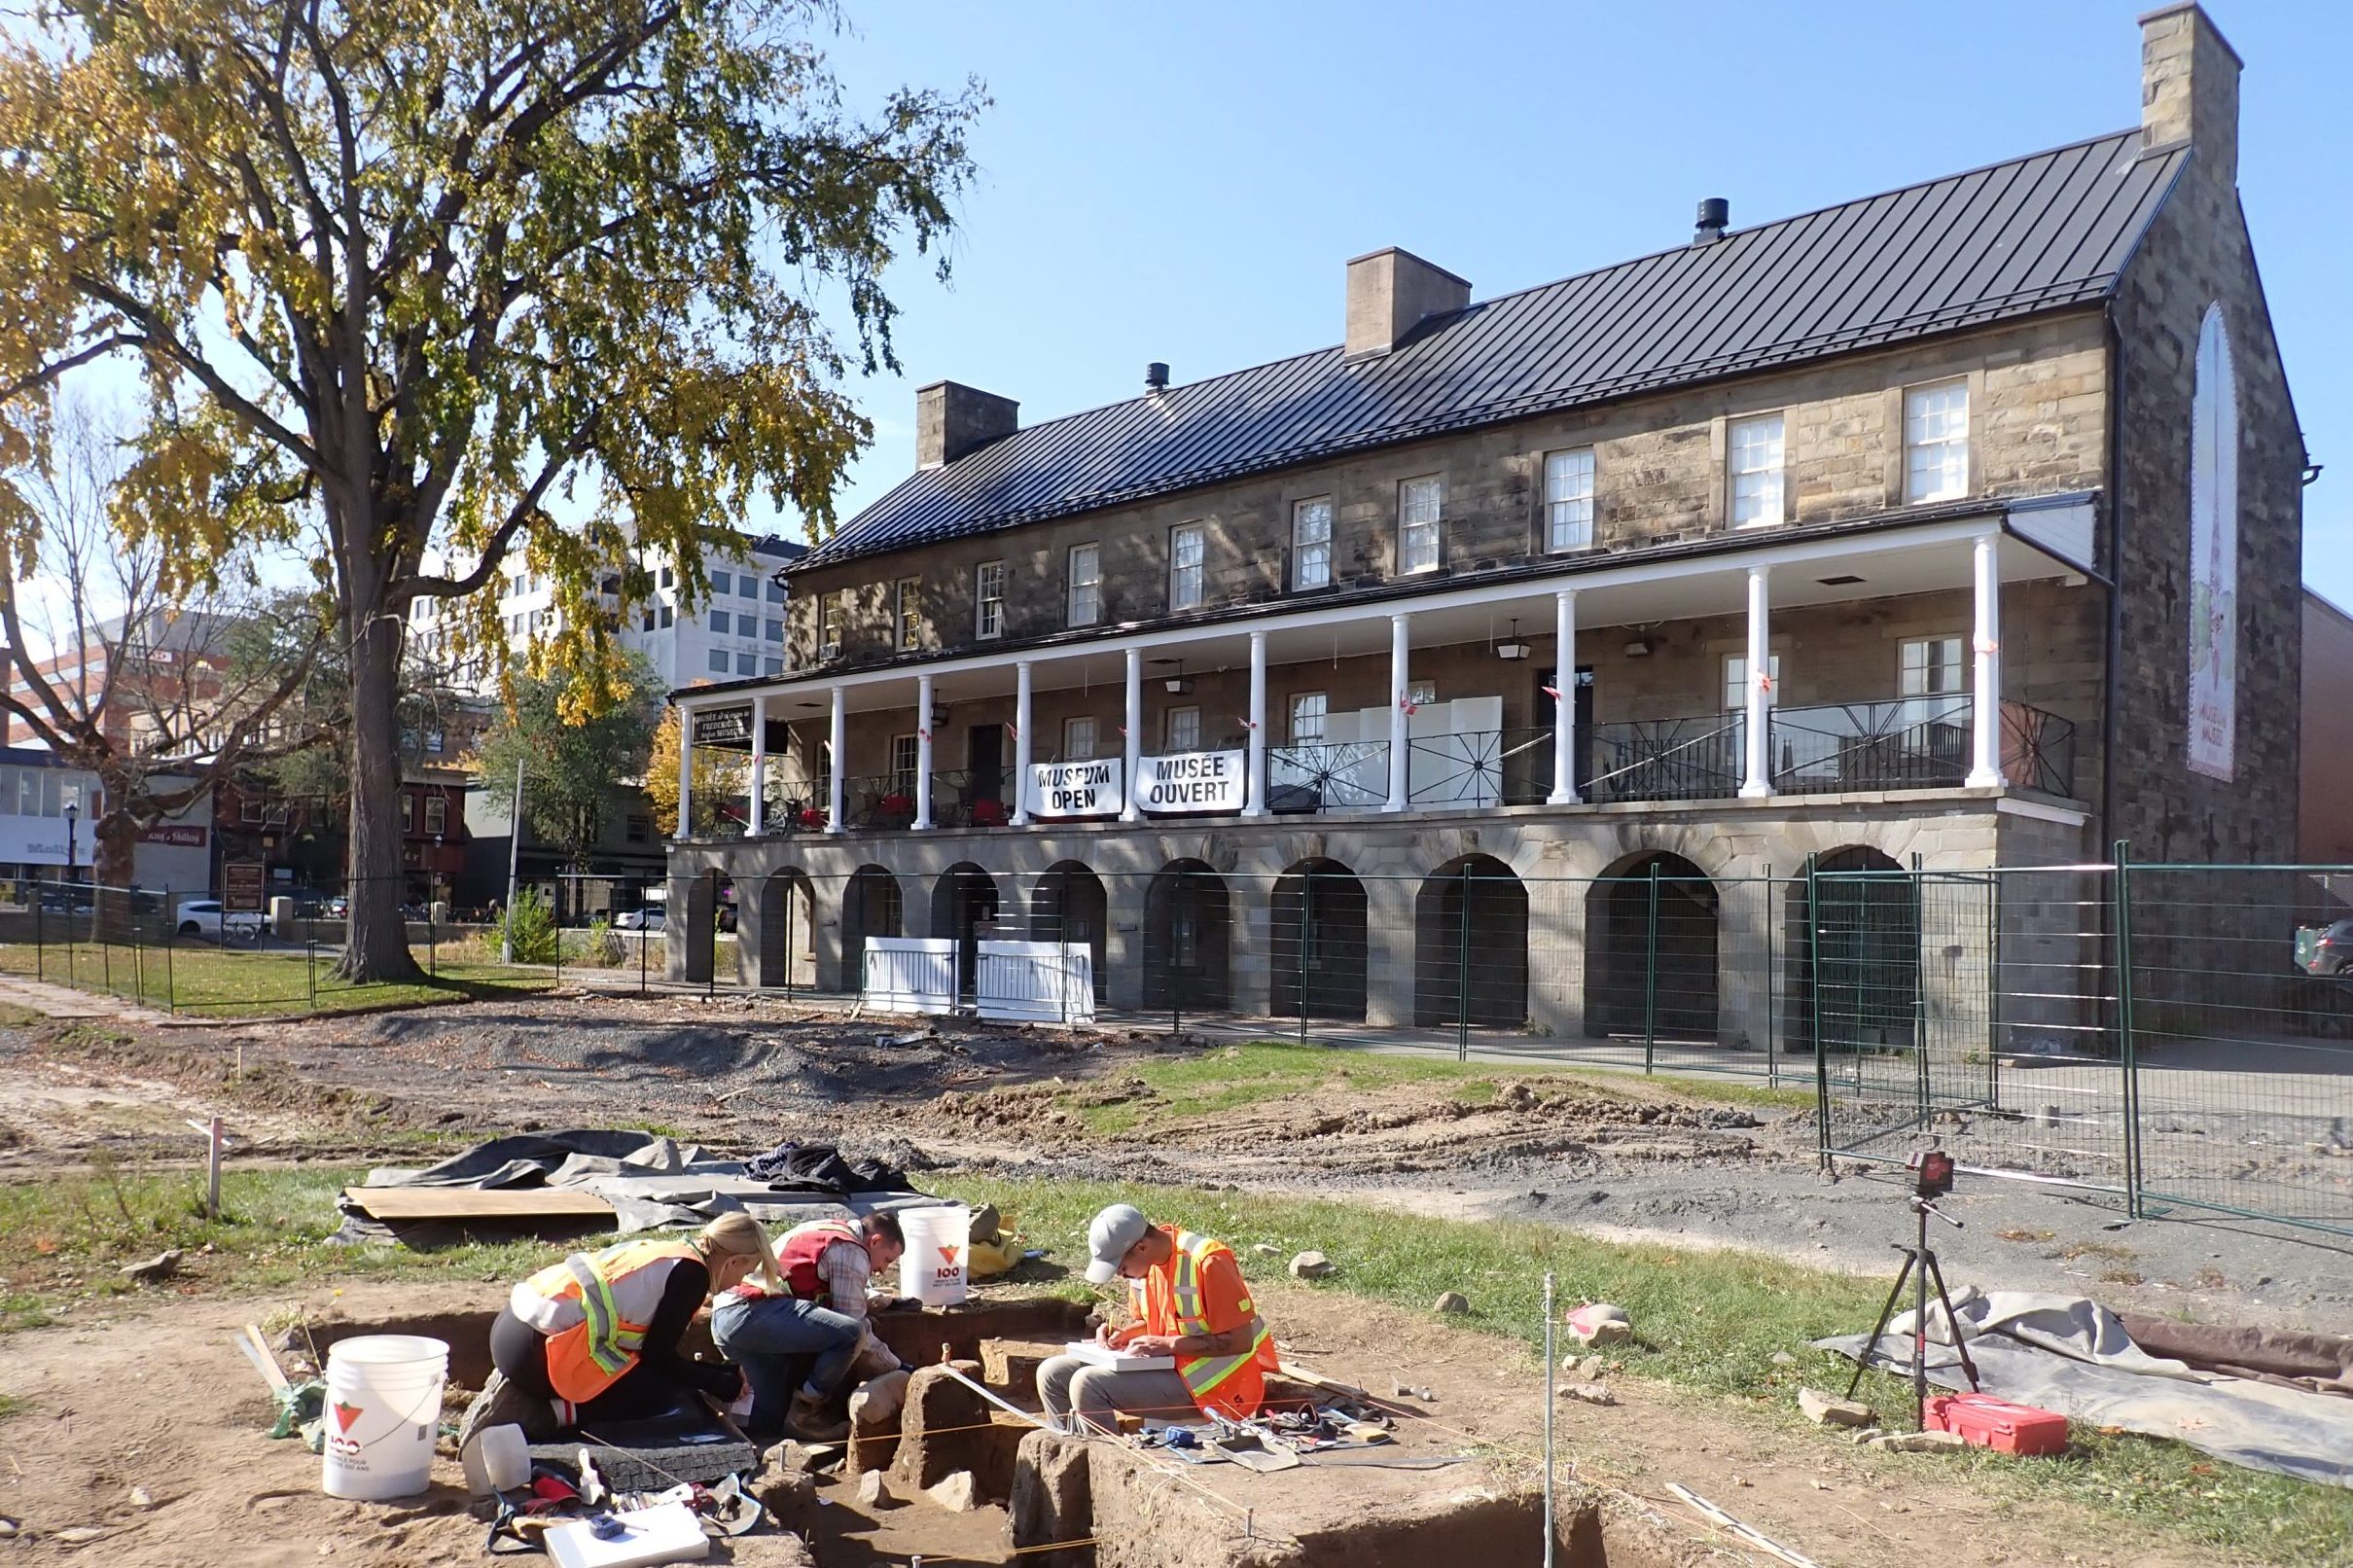 The archaeological excavation of Fredericton’s Officers’ Square